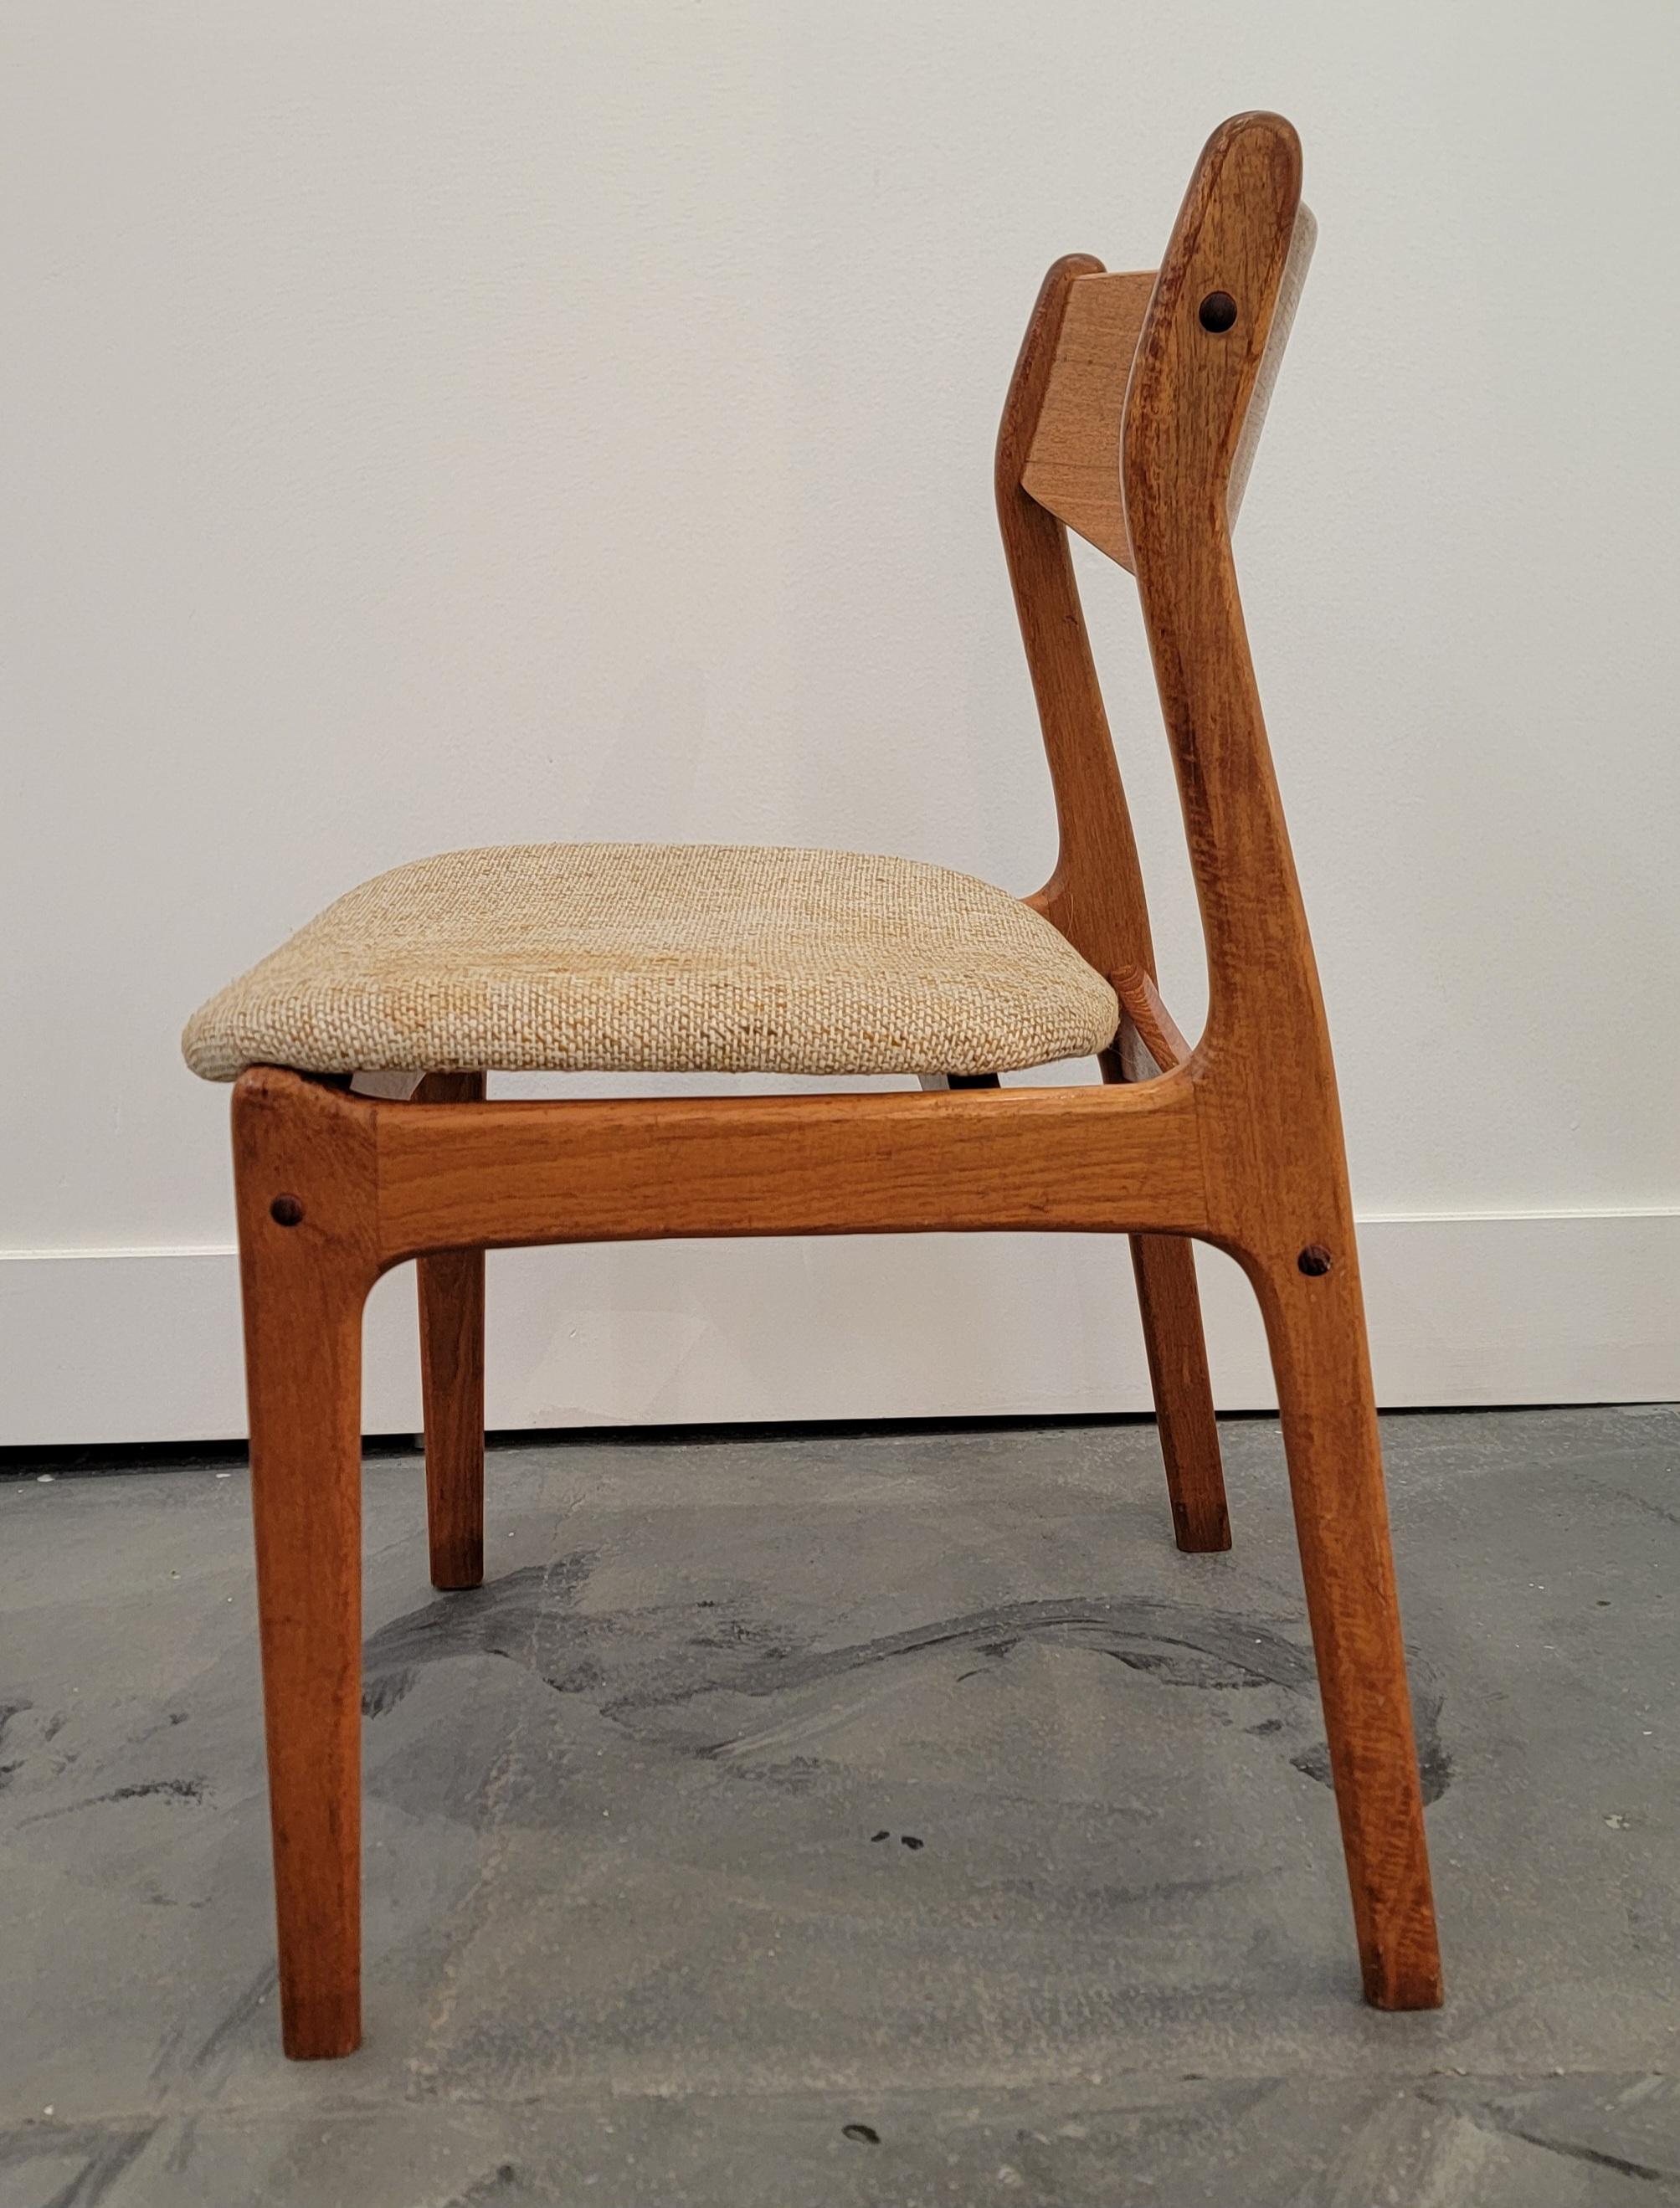 A set of ten teak Danish Modern dining chairs by P. E. Jorgensen for Farso Stolefabrik, Denmark. Floating seat feature. Original fabric is worn and needs replacing. Frames are structurally very solid. Branded under seats 